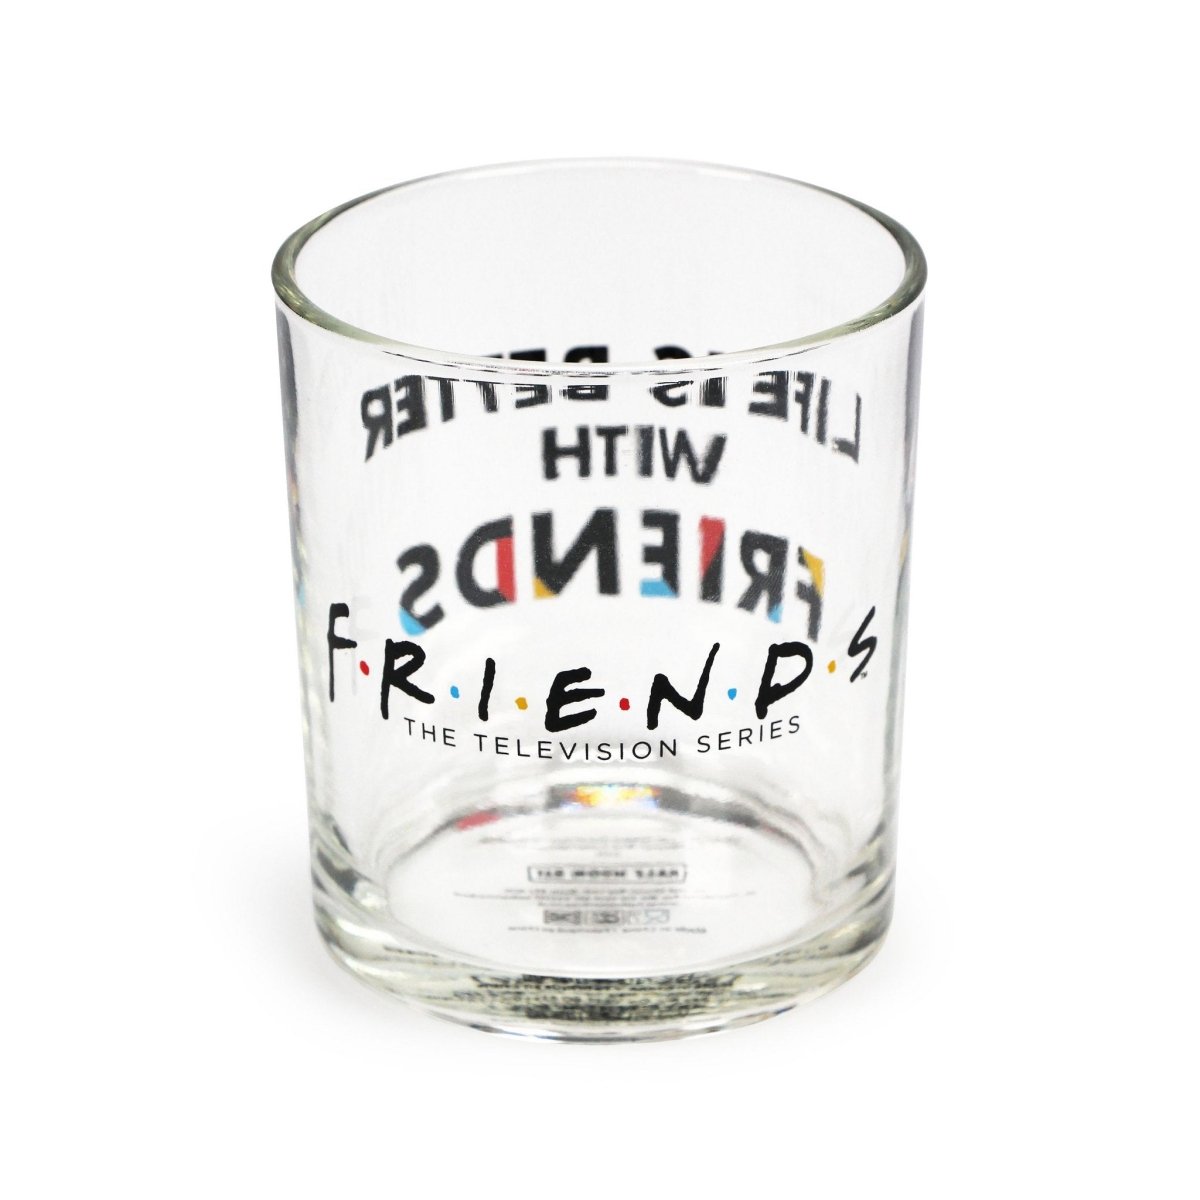 Glass Tumbler Boxed - Friends (Life is Better) - Inspire Newquay